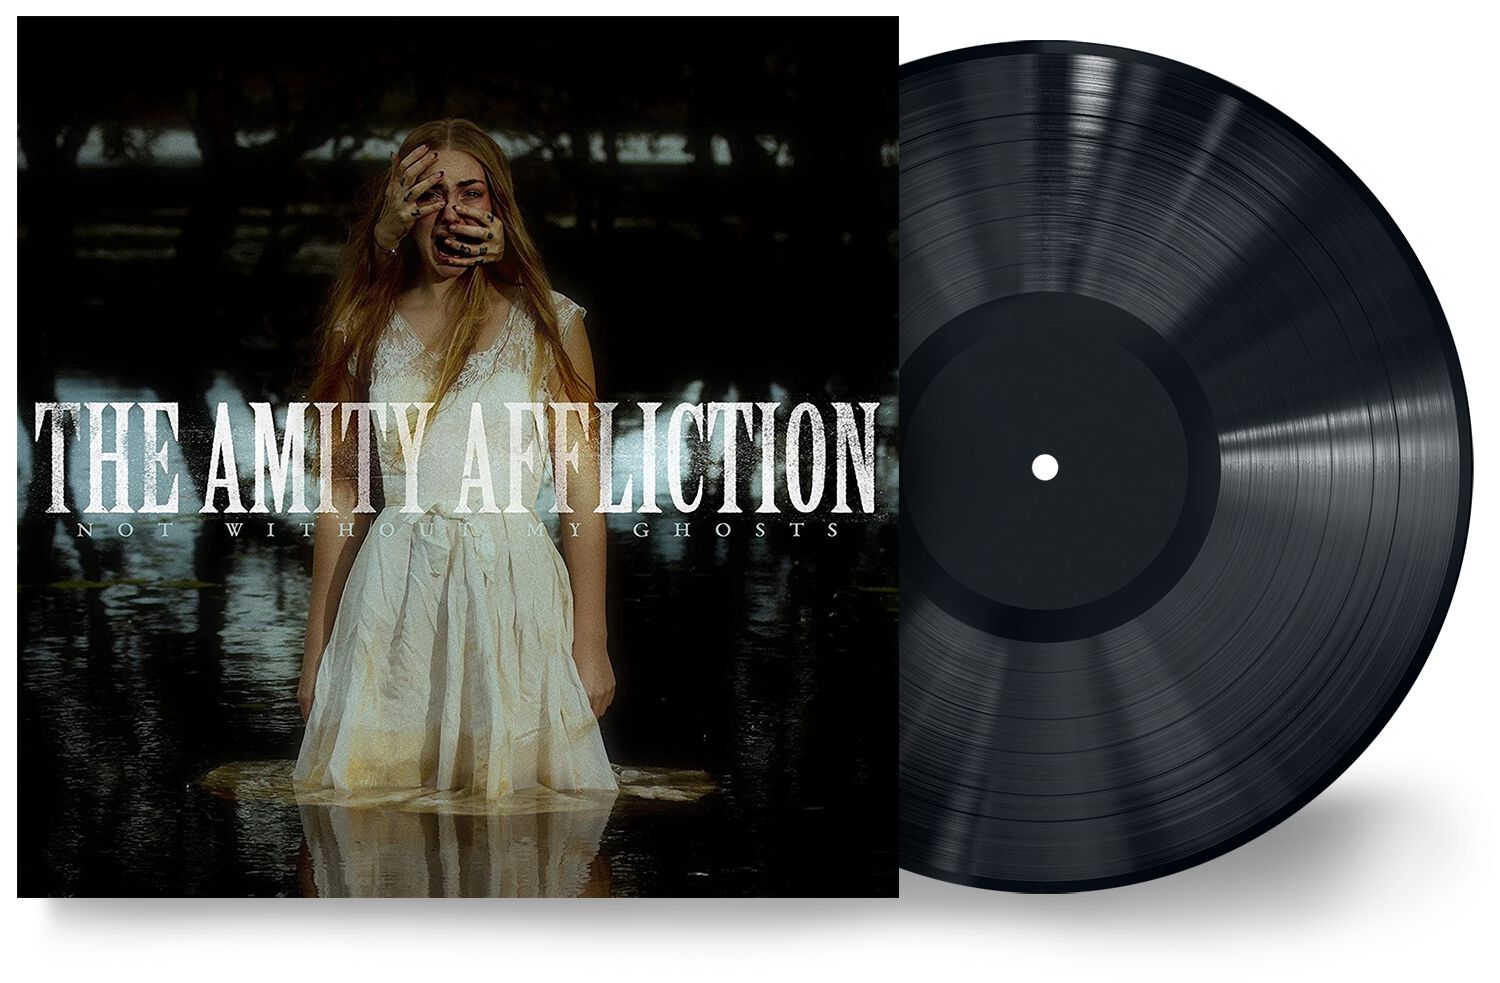 Not without my ghosts LP von The Amity Affliction